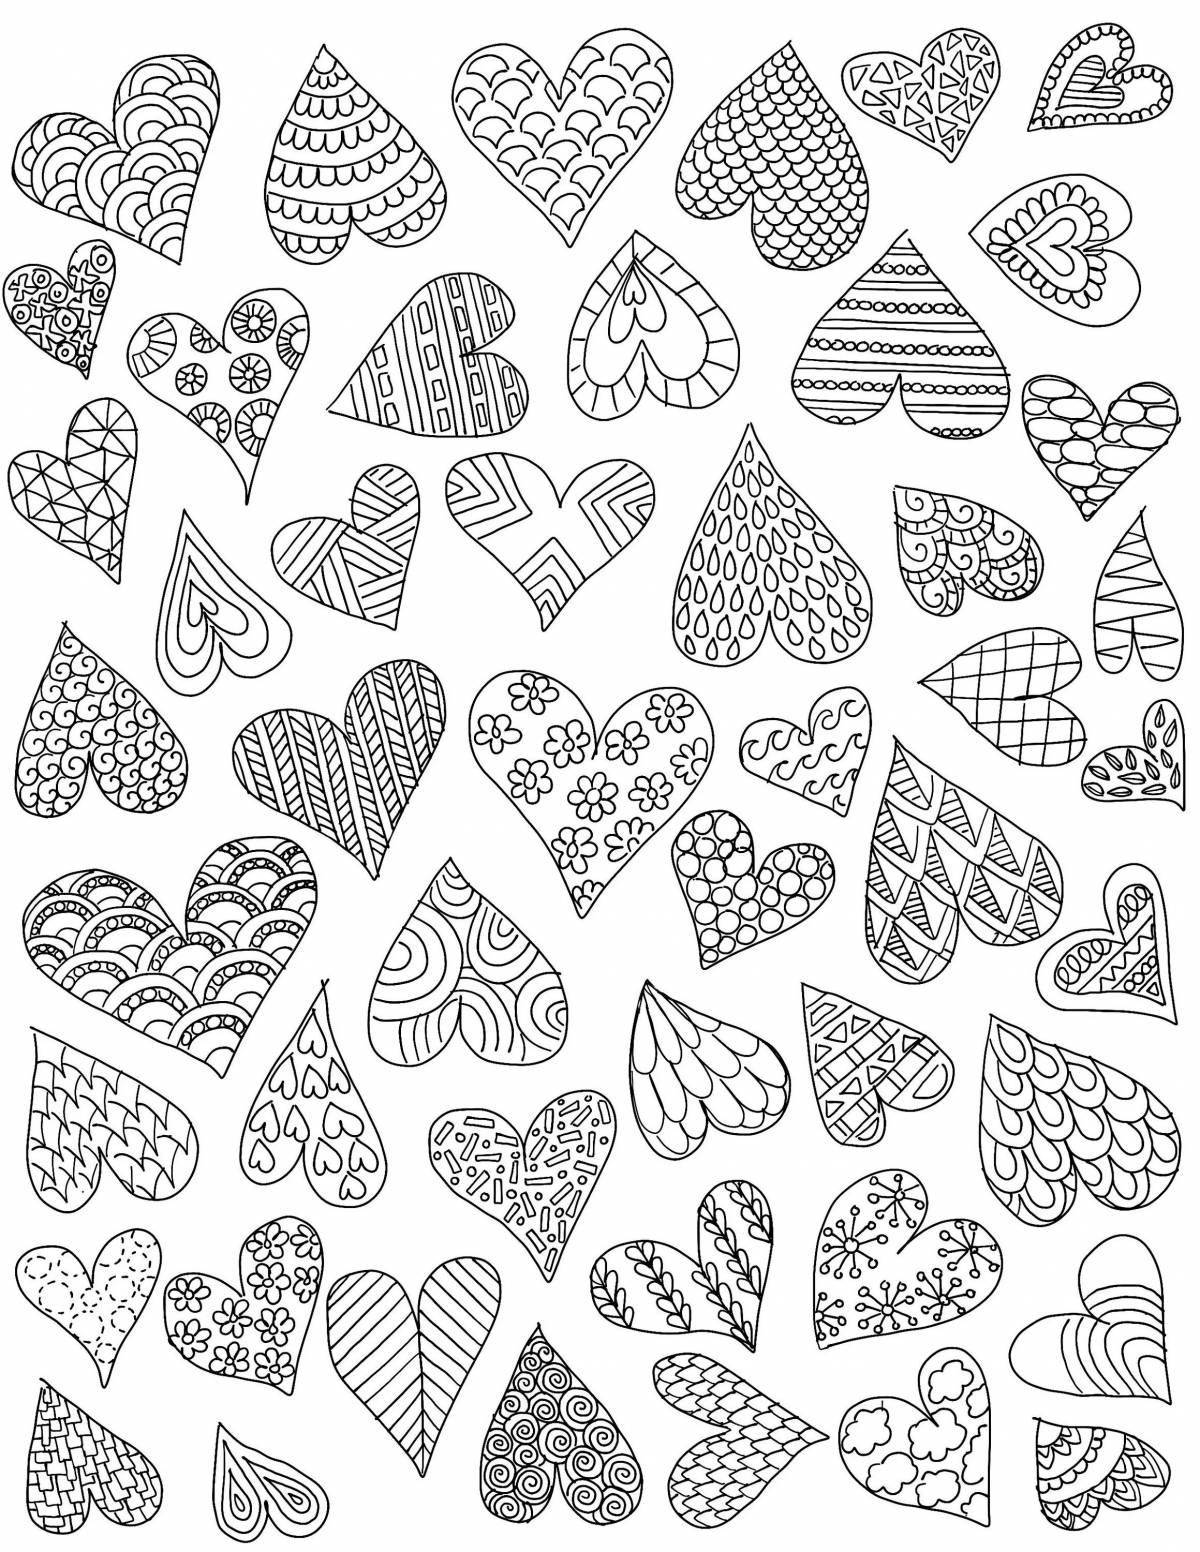 Bewitching many hearts coloring page